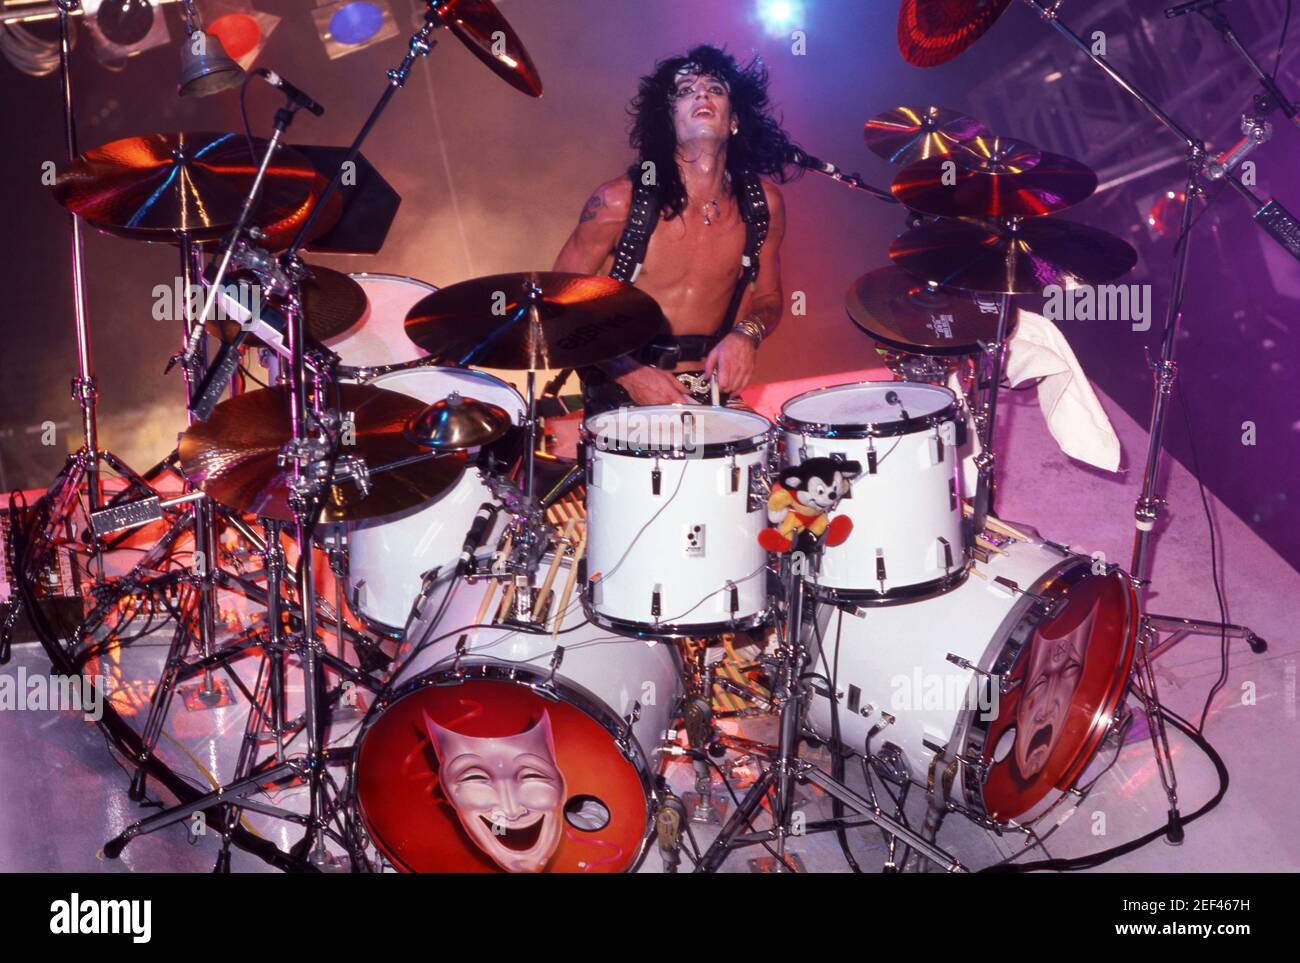 DETROIT, MI - SEPTEMBER 15: Drummer Tommy Lee of the American hard rock  band Motley Crue poses for a studio portrait during the Theater of Pain  Tour on September 15, 1985 at